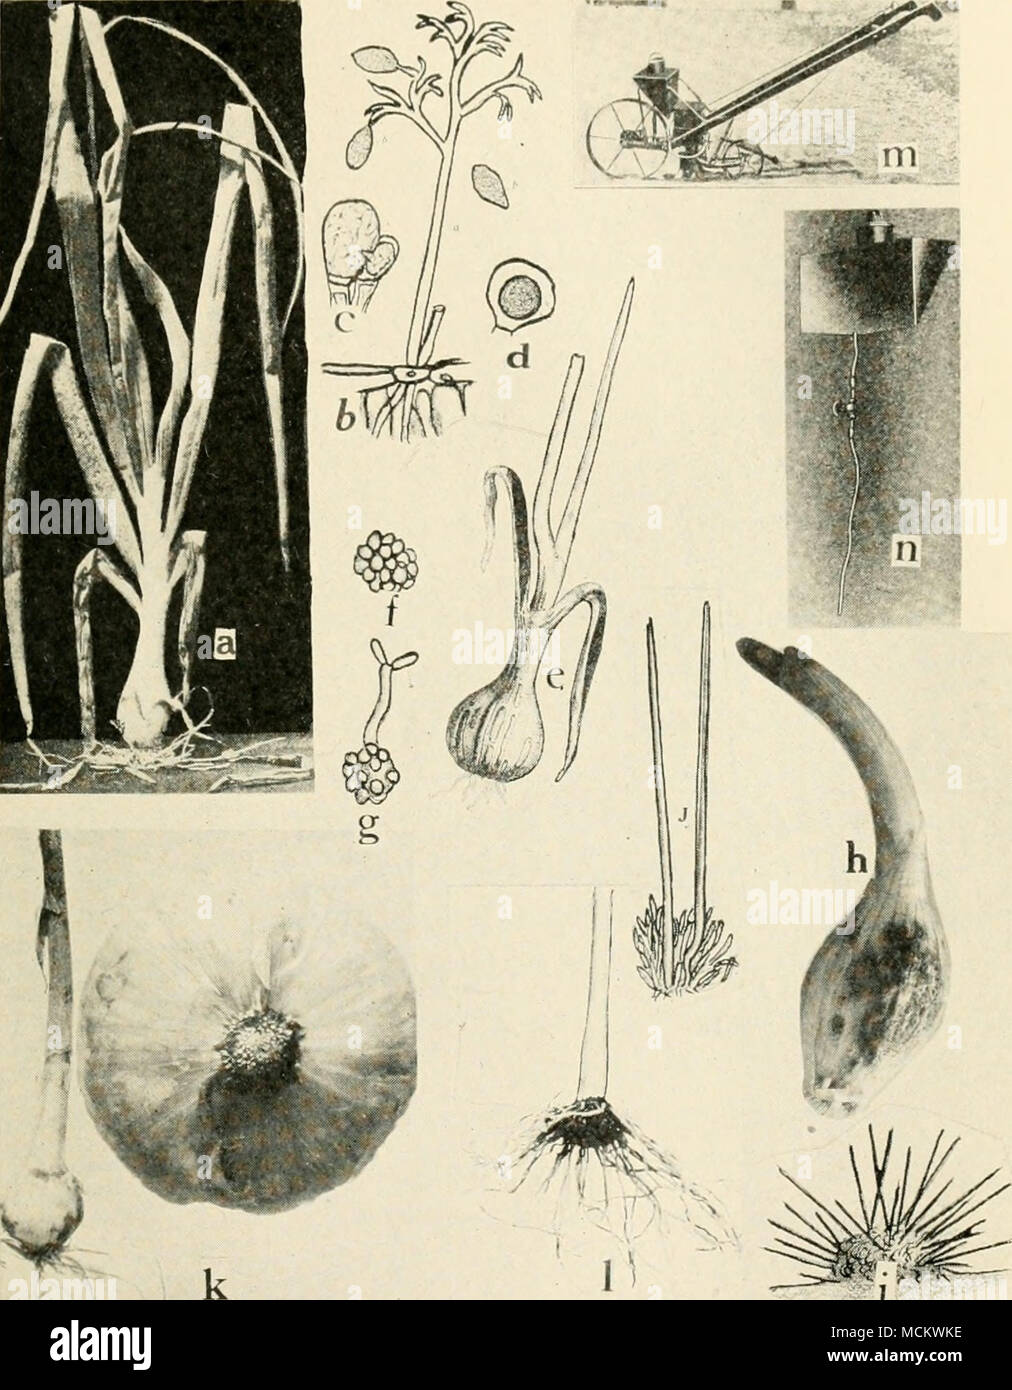 . , n ^i;&quot; Fig. 54. Onion Diseases. a. Downy mildew, b. mature conidiophore and conidia of Peronospora schleideni, c. fertilization of the female oogonium by the male antheridium, d. oospore (a. to d. after Wh^tzel), e. onion smut, /. spore ball of the smut fungus, g. spore germina- tion, formation of sporidia at x, h. Vermicularia anthracnose, i. section through acervulis of Vermicularia cirdnans. j. setae and spore formation in V. circinans {e. to g., i. and j. after Thaxter), k. pink root of onion, healthy and diseased bulbs, I. pink root of onion showing nipple formation, m. a formald Stock Photo